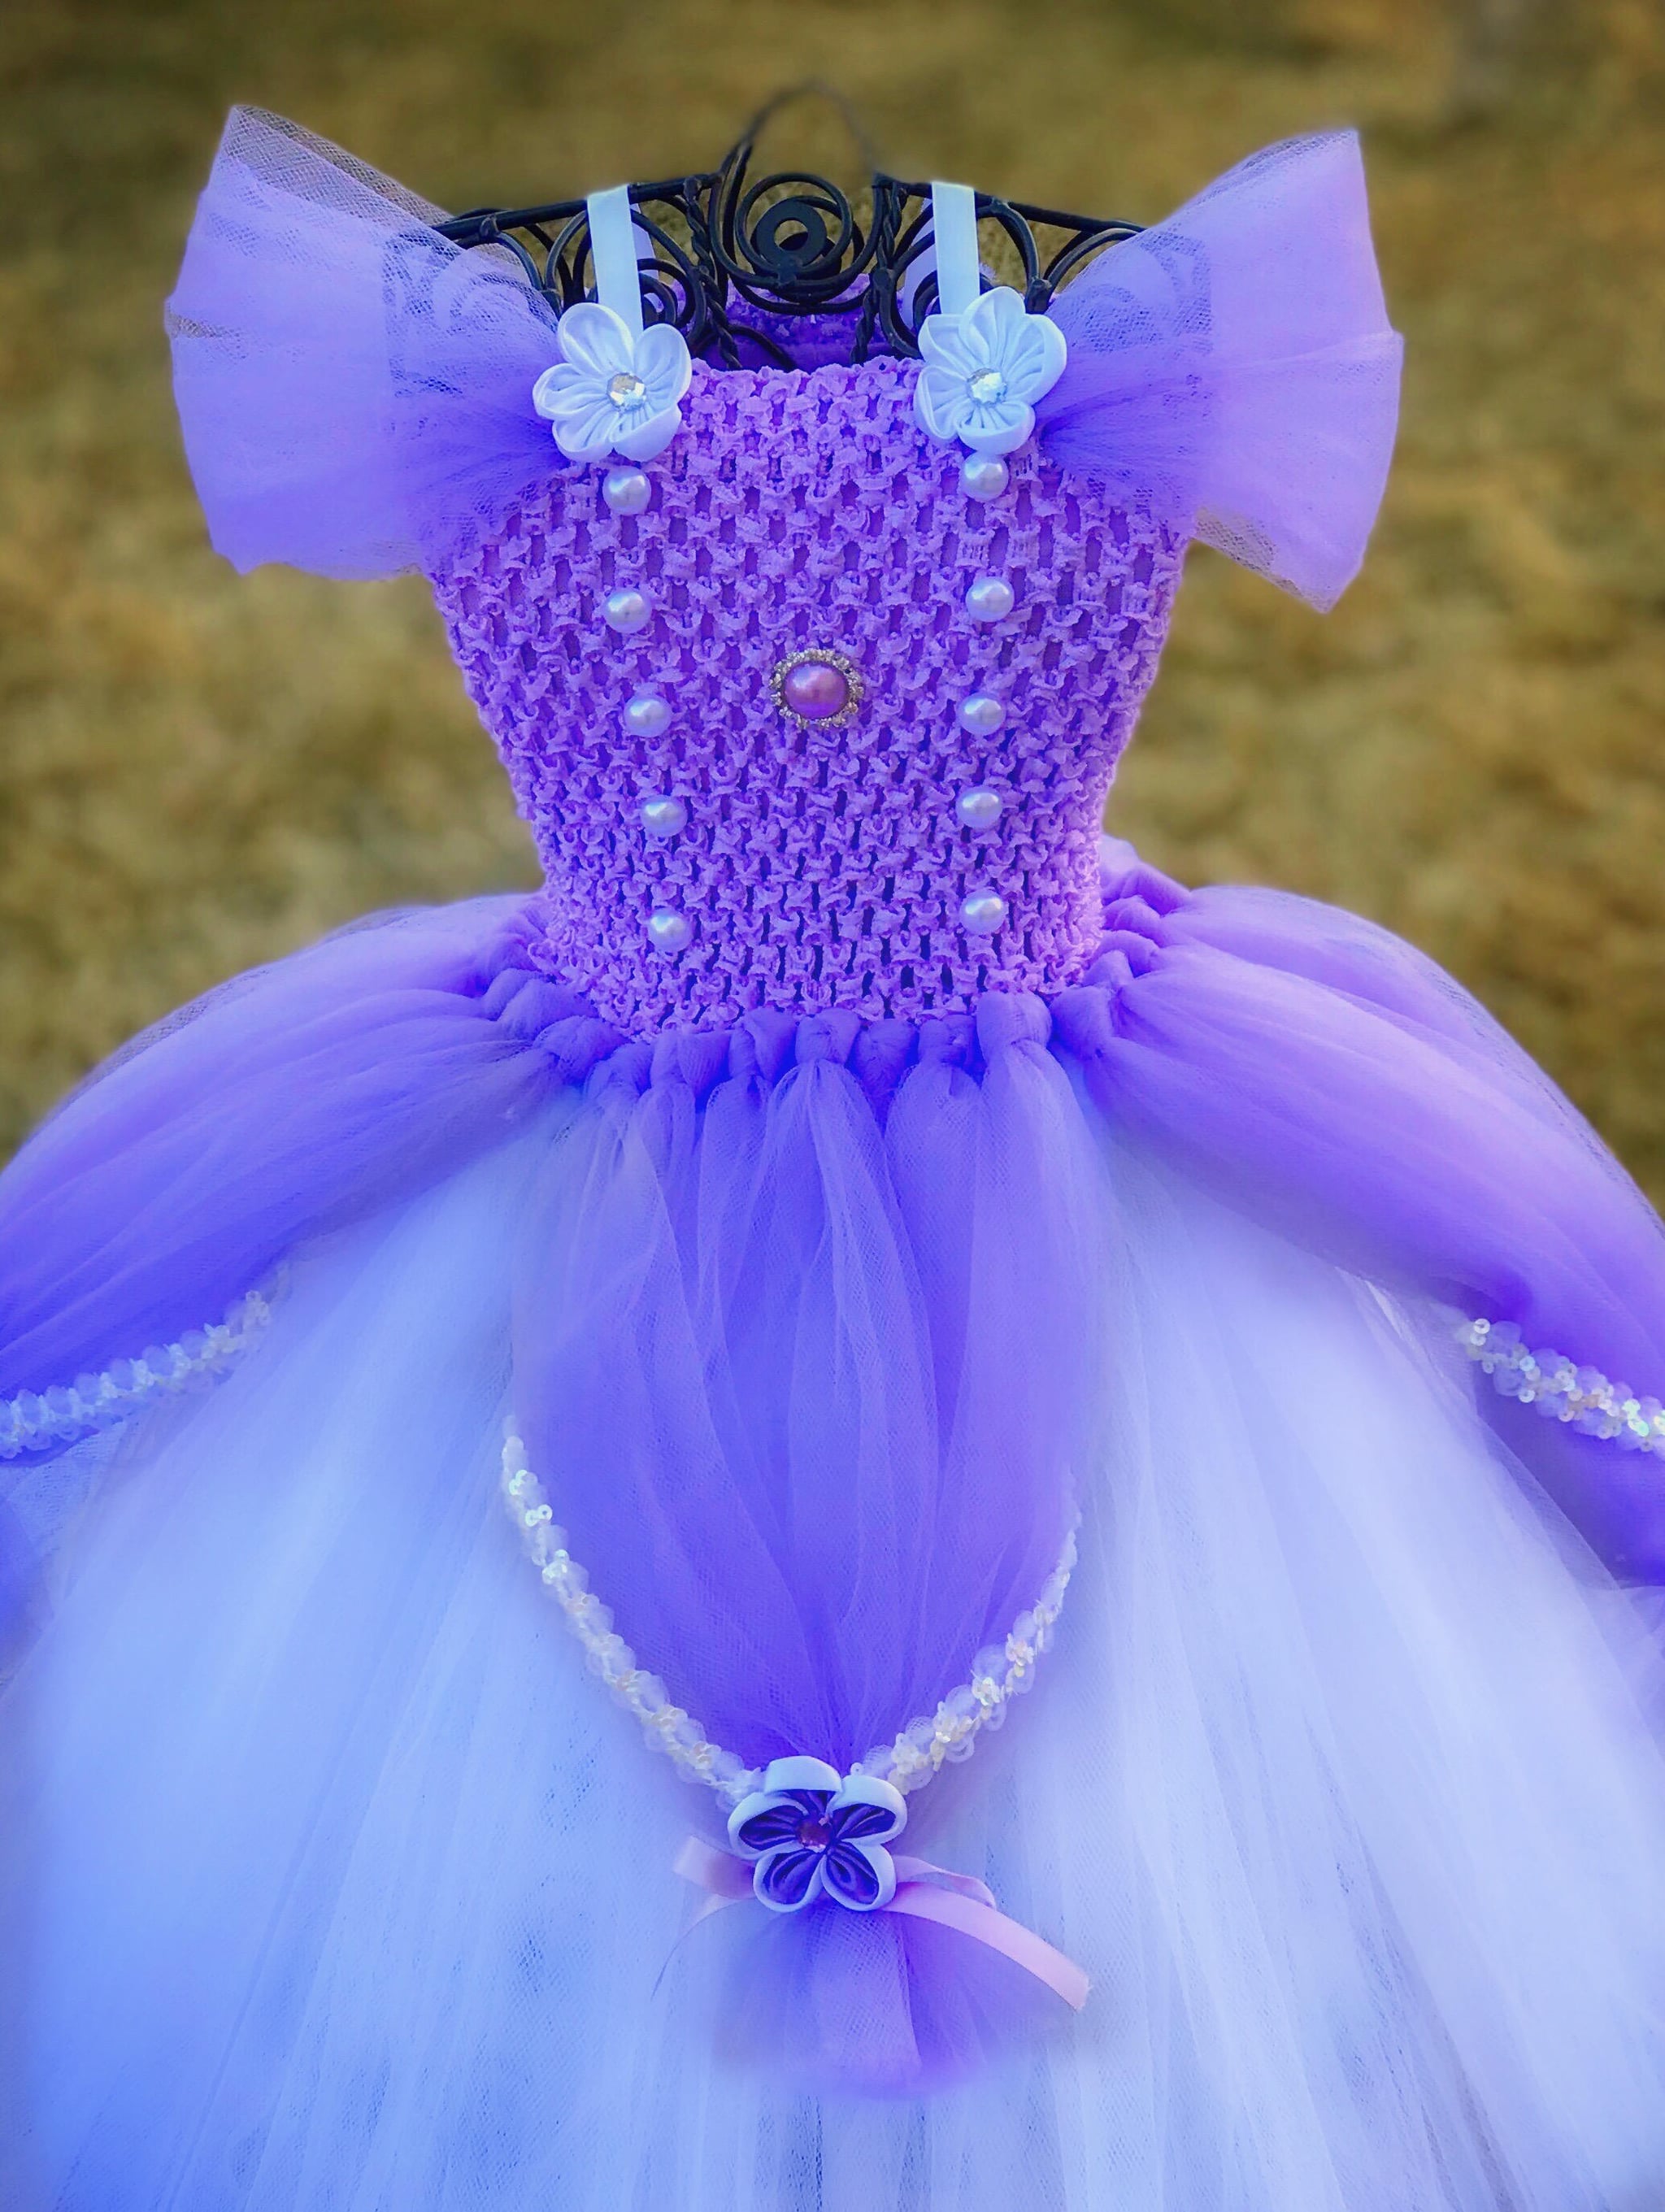 sofia the first gown